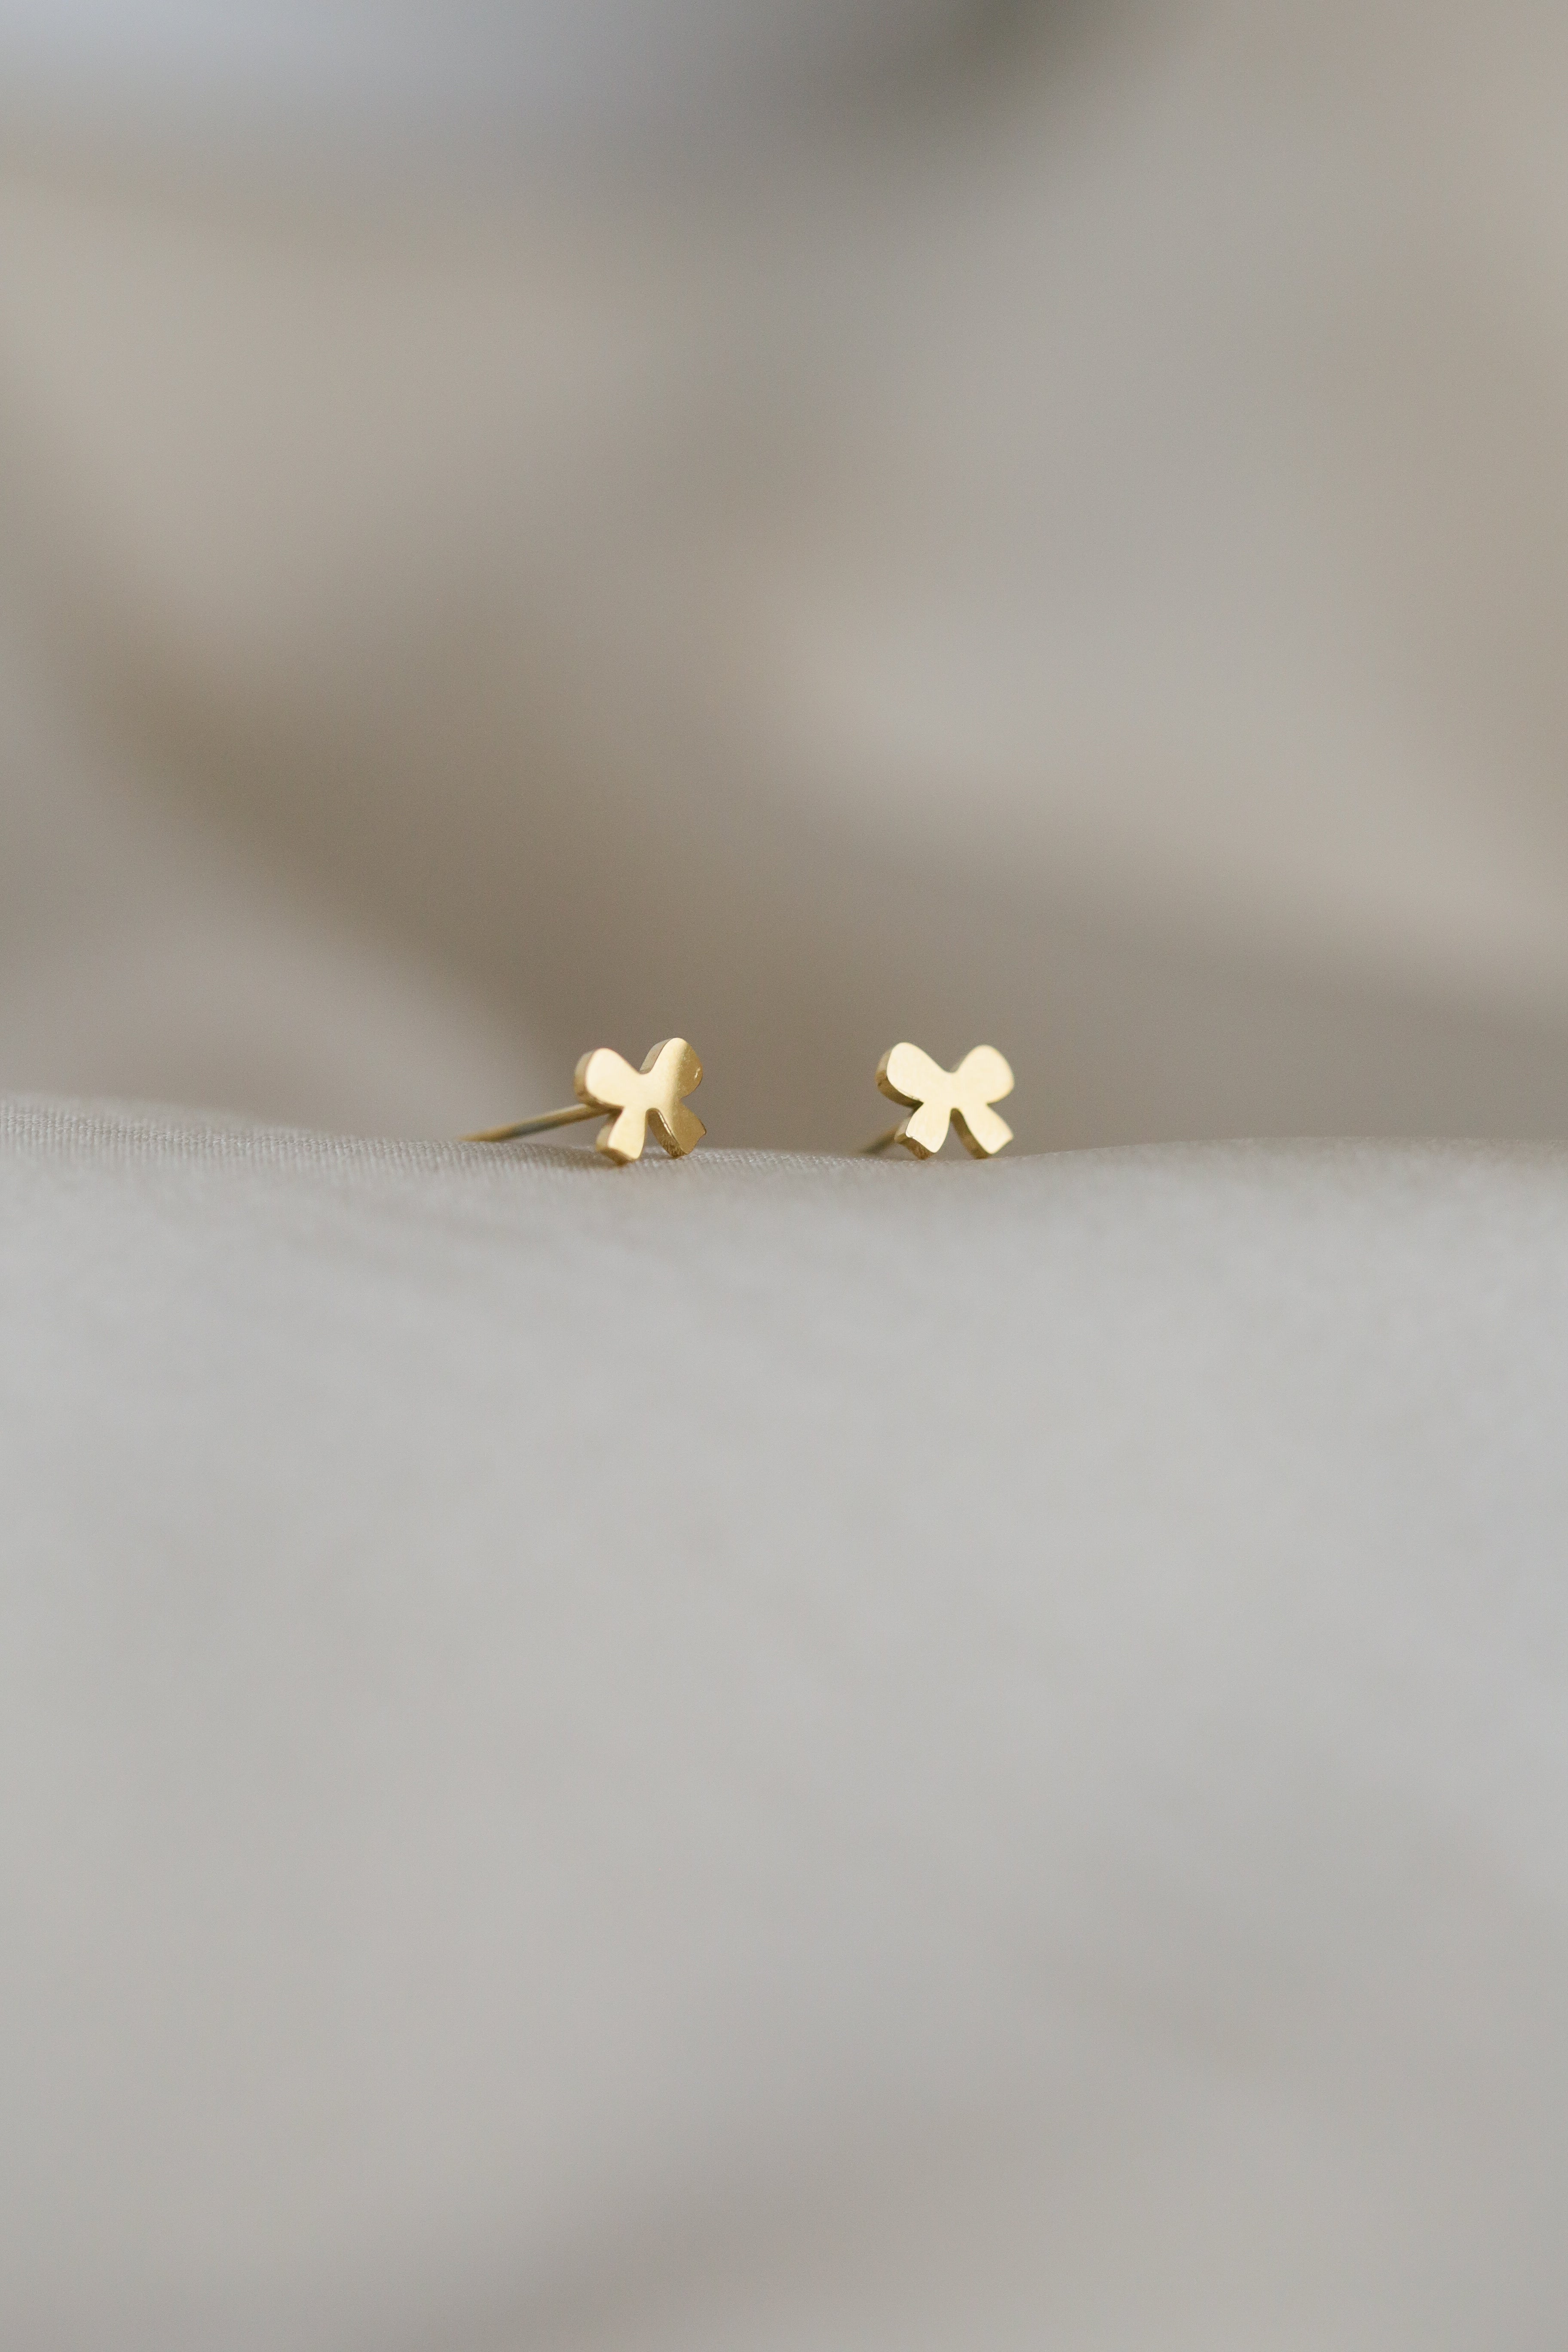 The Heart - Bow Studs - Boutique Minimaliste has waterproof, durable, elegant and vintage inspired jewelry